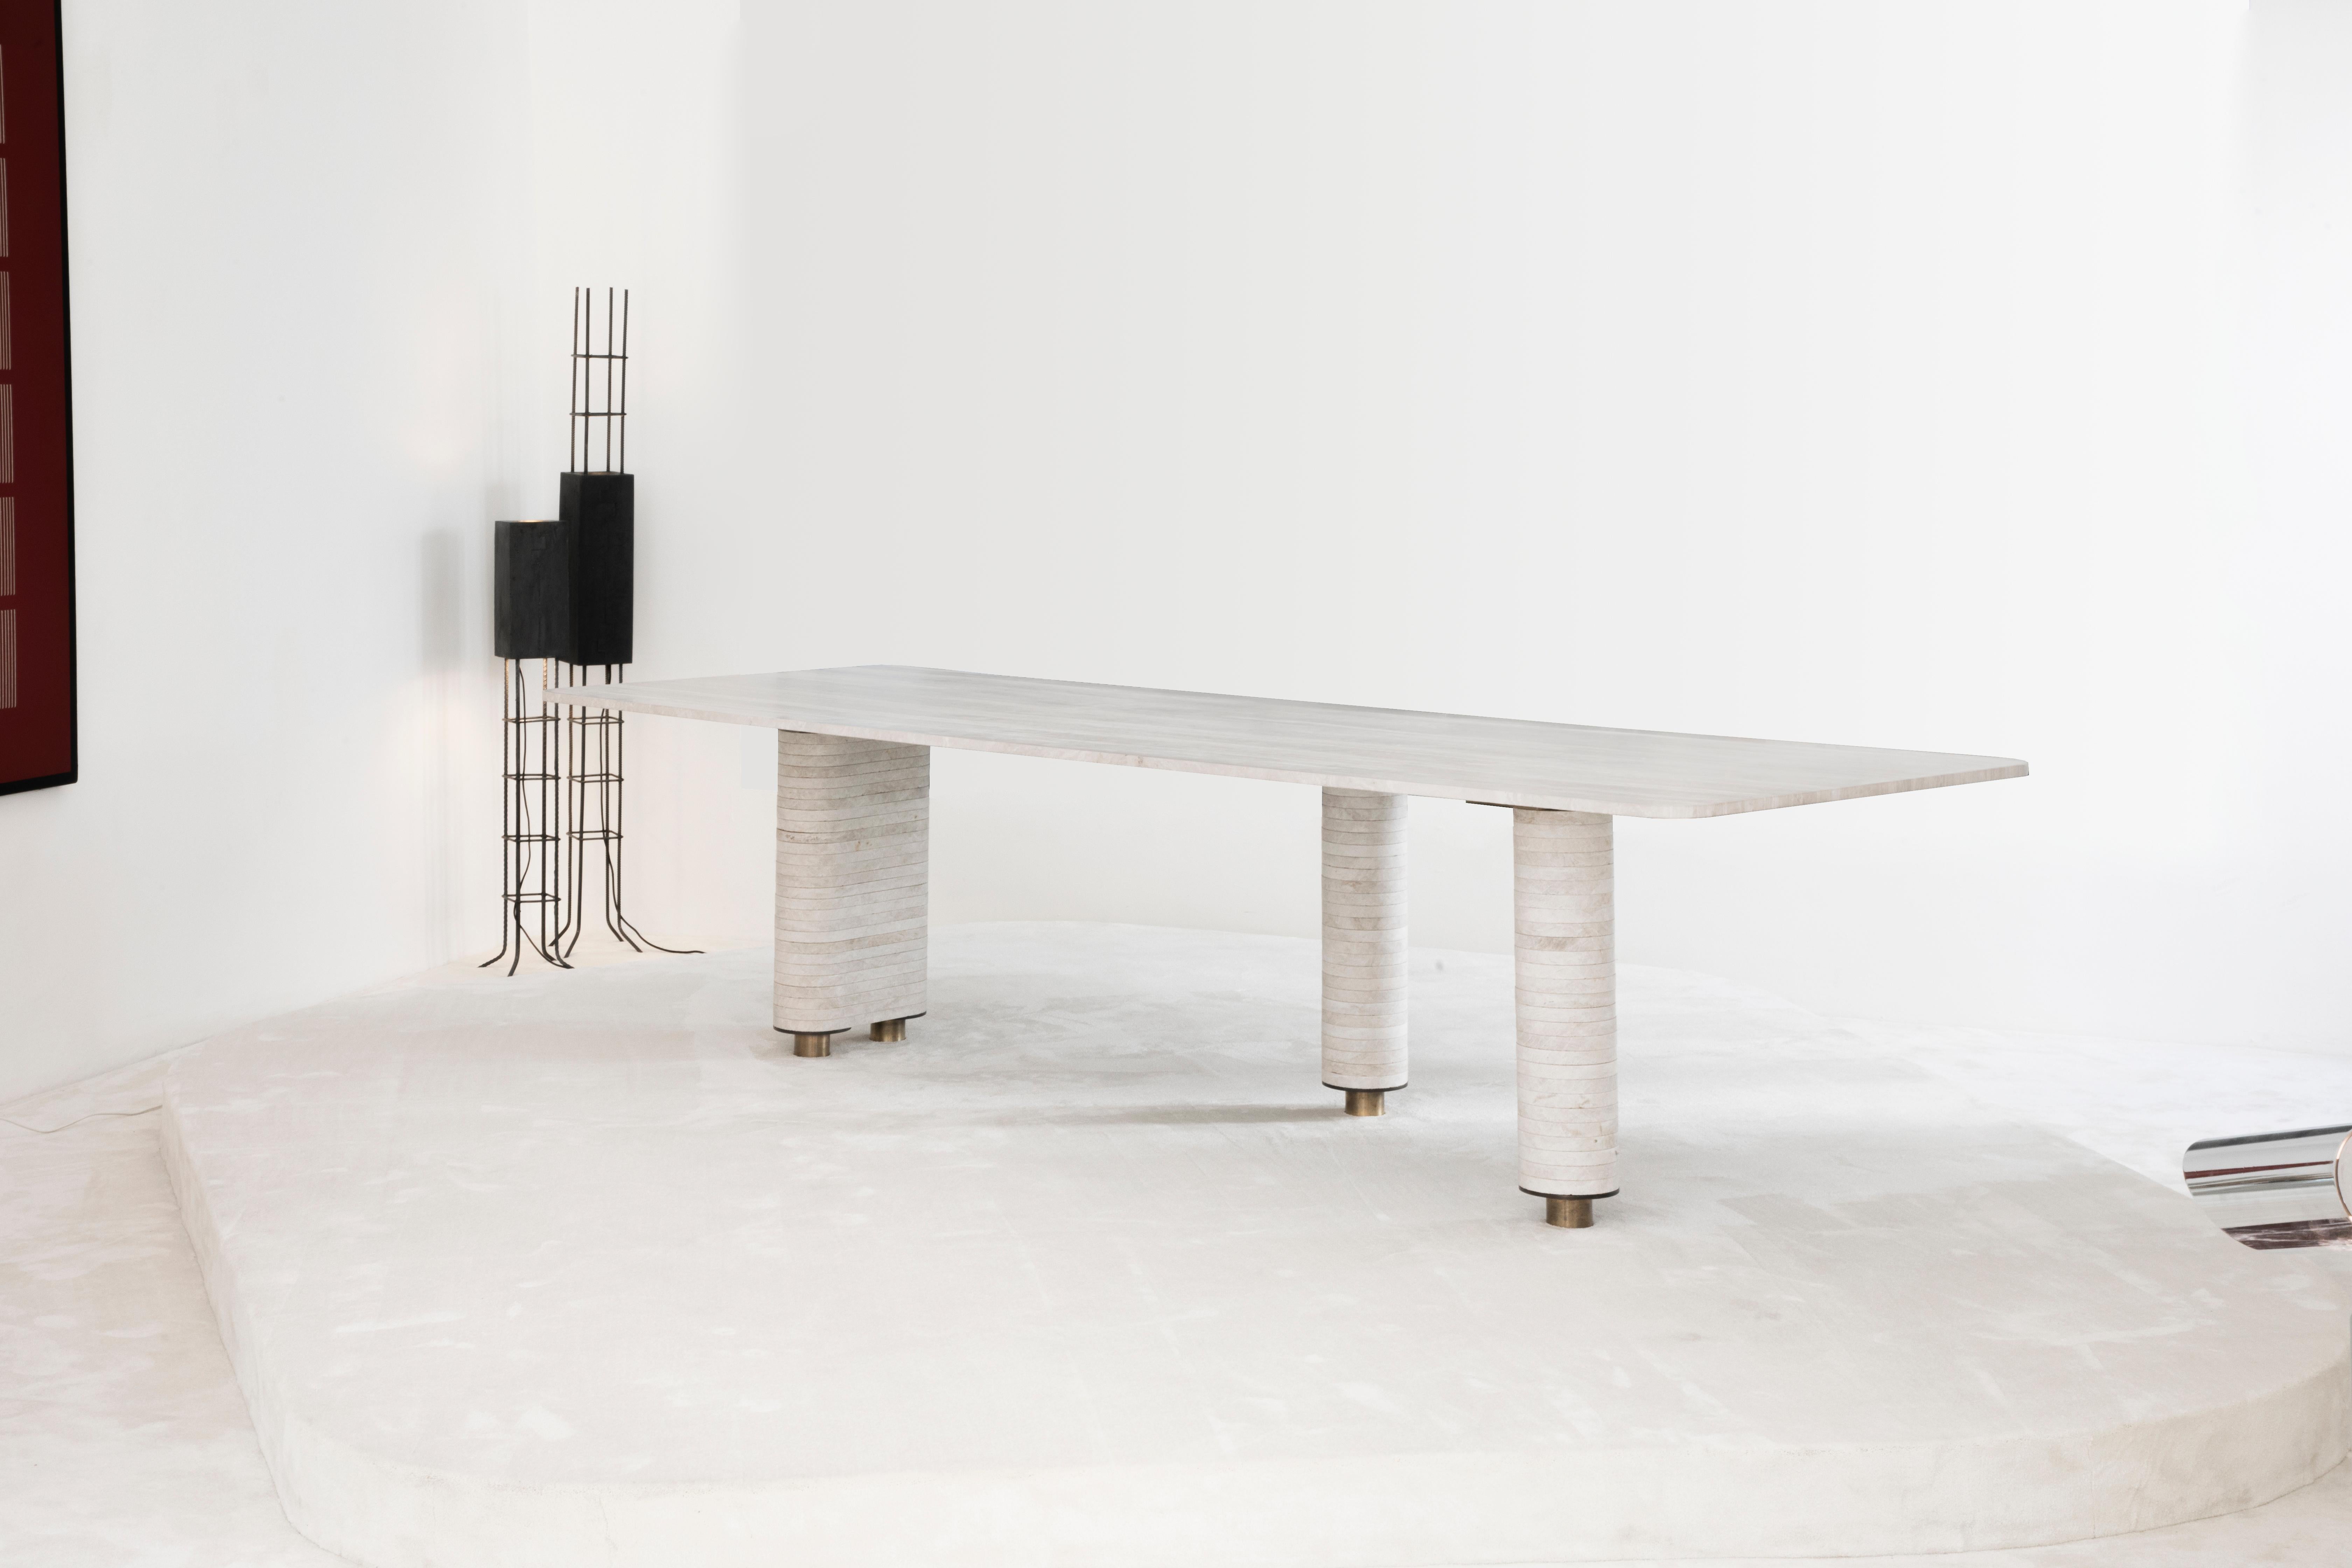 Aro dining table by Atra Design
Limites Edition of 5
Dimensions: D 280 x W 110 x H 73.6 cm
Materials: Taj Mahal marble, brass

Atra Design
We are Atra, a furniture brand produced by Atra form a mexico city–based high end production facility